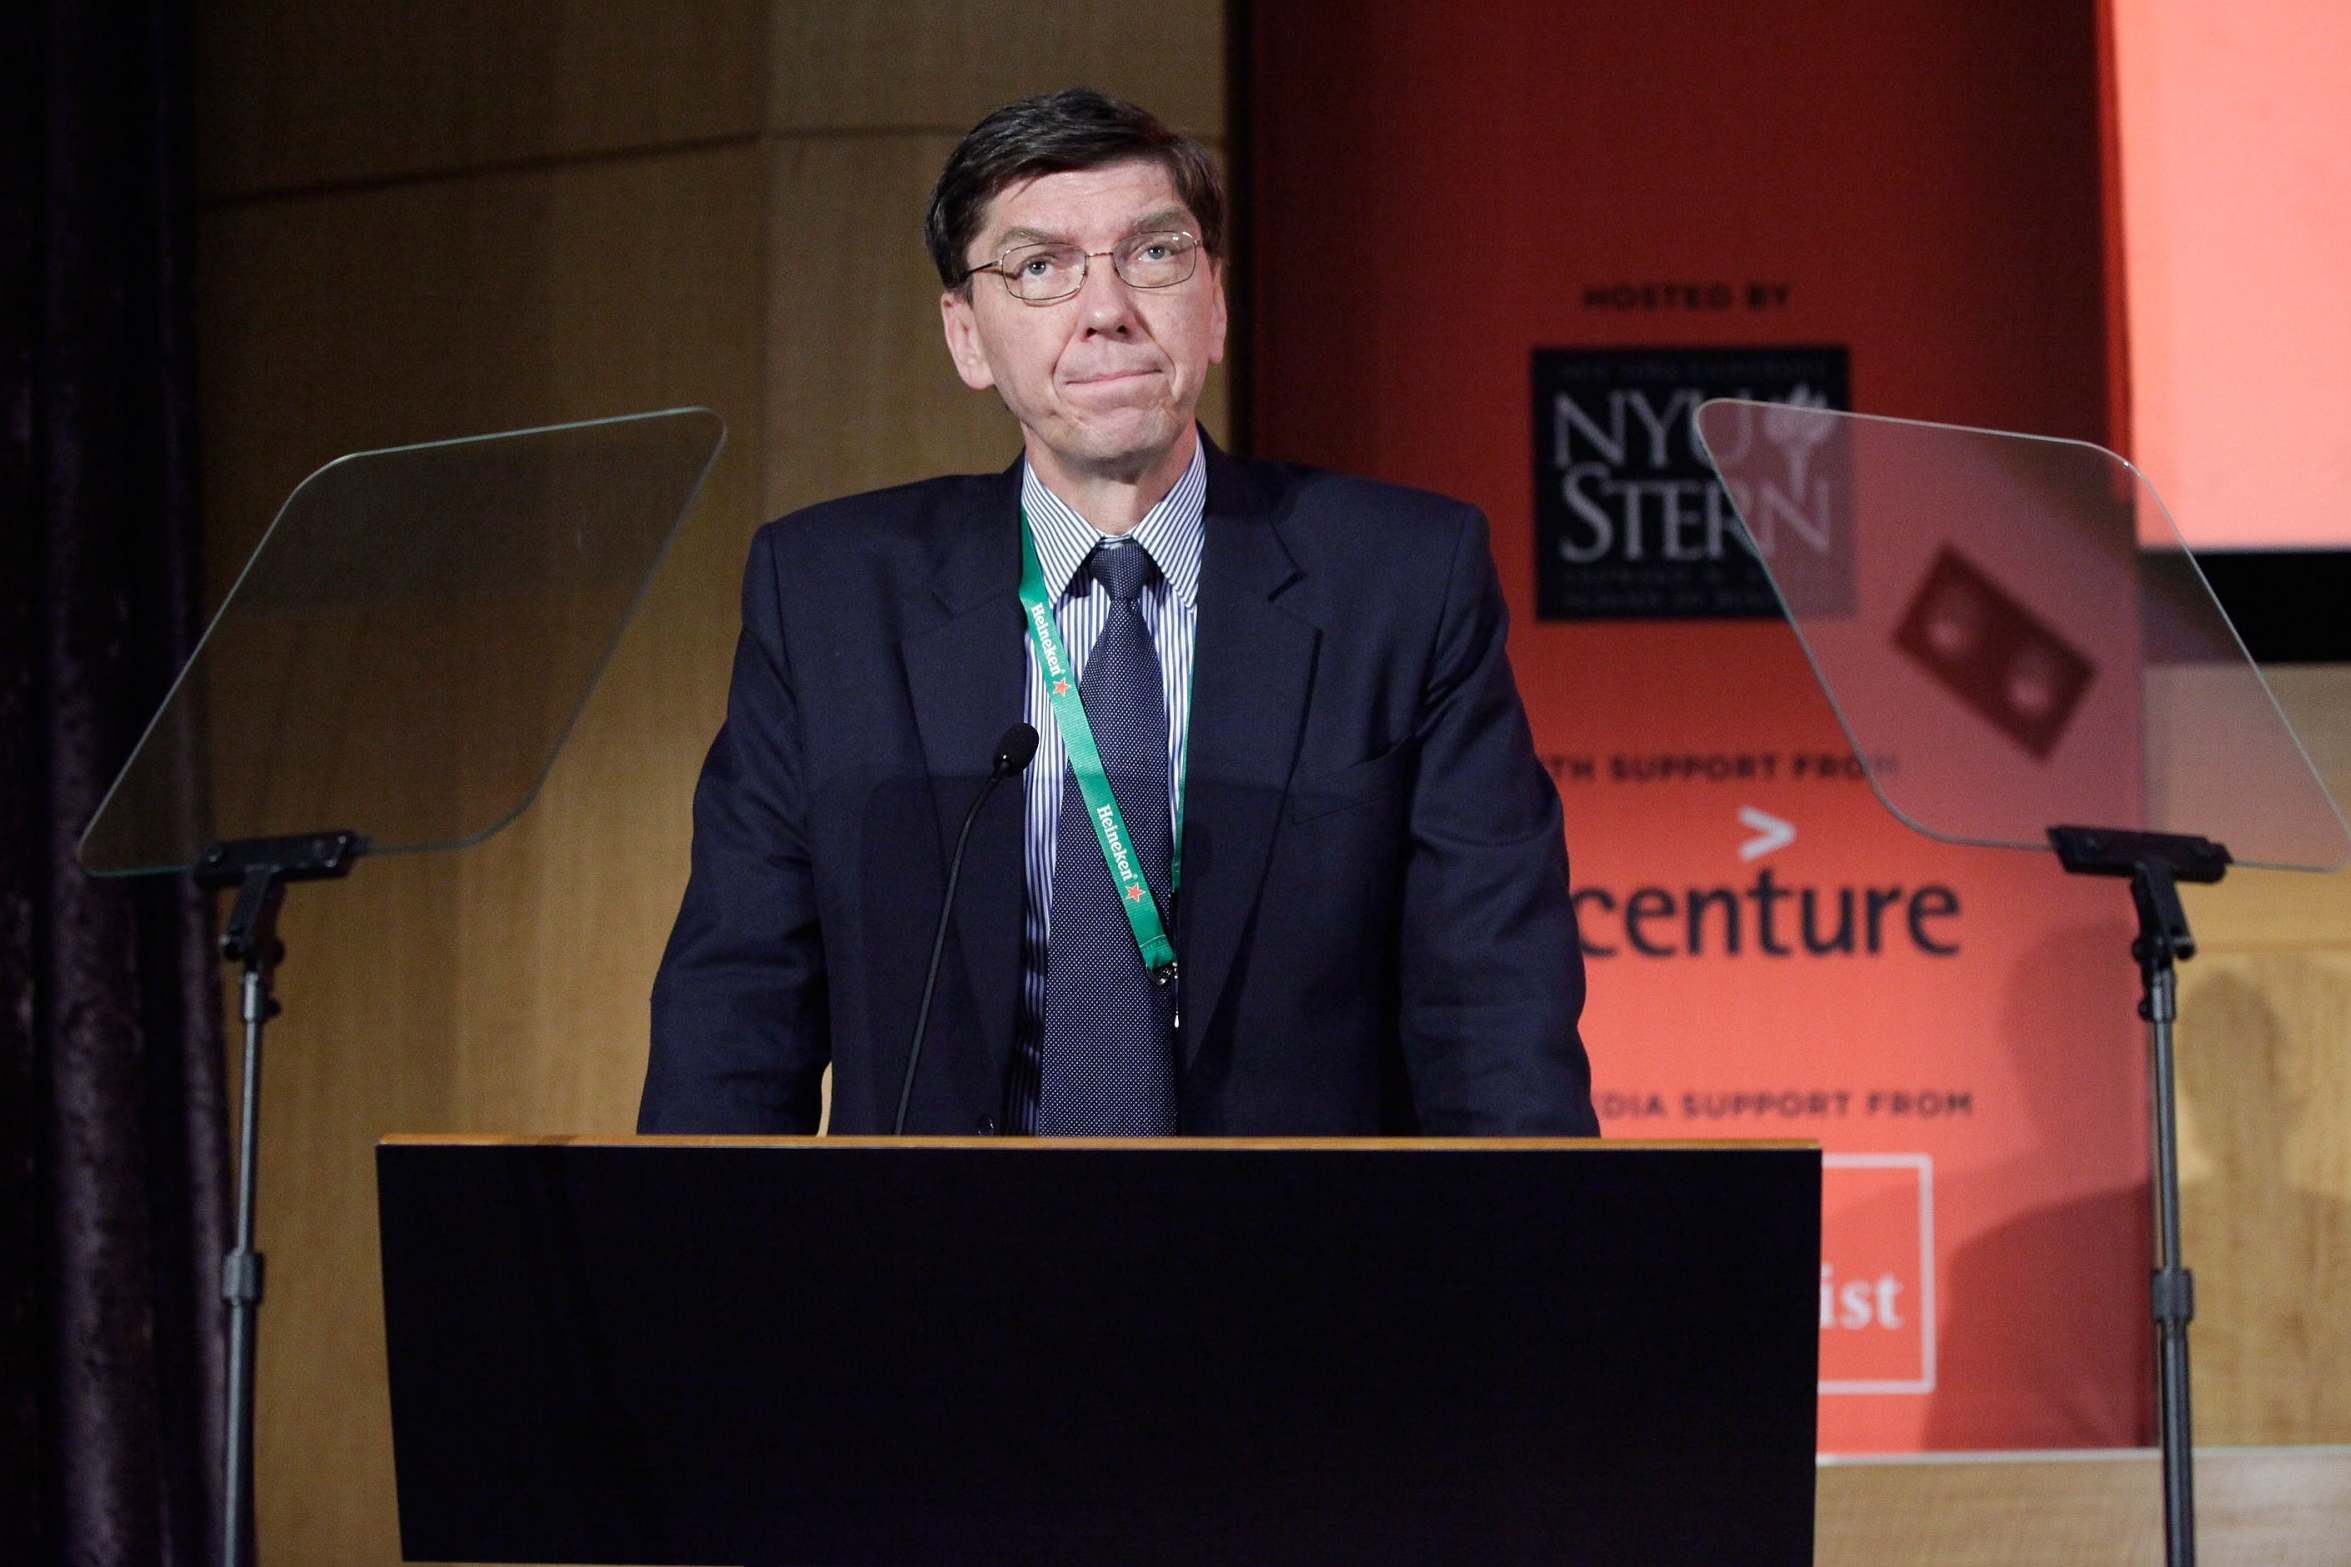 Clayton Christensen influential business thinker who propounded